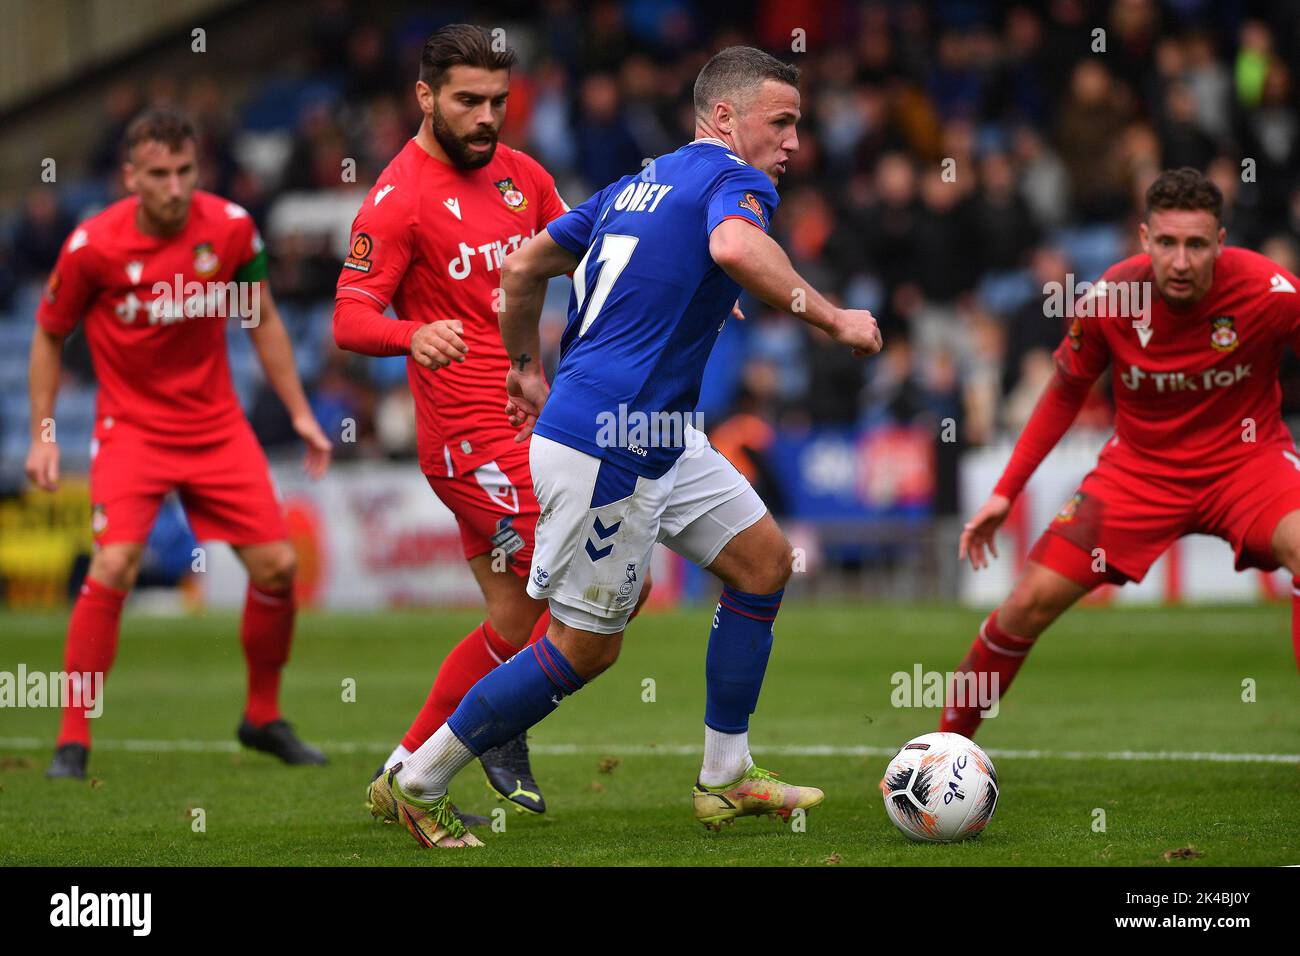 Oldham, UK. 1st October 2022during the Vanarama National League match between Oldham Athletic and Wrexham at Boundary Park, Oldham on Saturday 1st October 2022John Rooney of Oldham Athletic makes his debut during the Vanarama National League match between Oldham Athletic and Wrexham at Boundary Park, Oldham on Saturday 1st October 2022 during the Vanarama National League match between Oldham Athletic and Wrexham at Boundary Park, Oldham on Saturday 1st October 2022. Credit: MI News & Sport /Alamy Live News Stock Photo